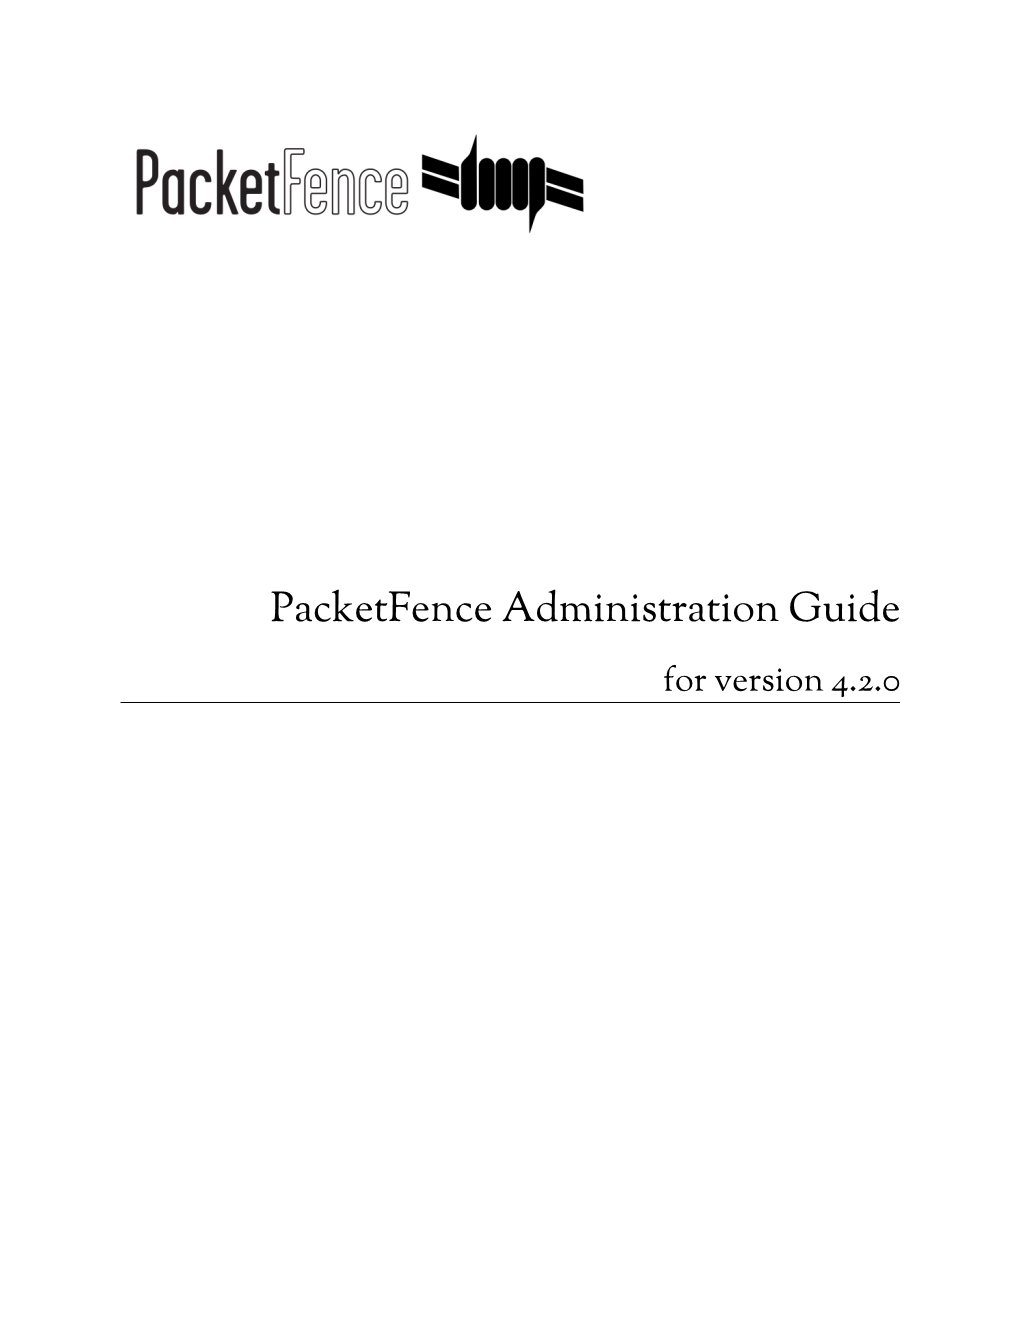 Packetfence Administration Guide for Version 4.2.0 Packetfence Administration Guide by Inverse Inc